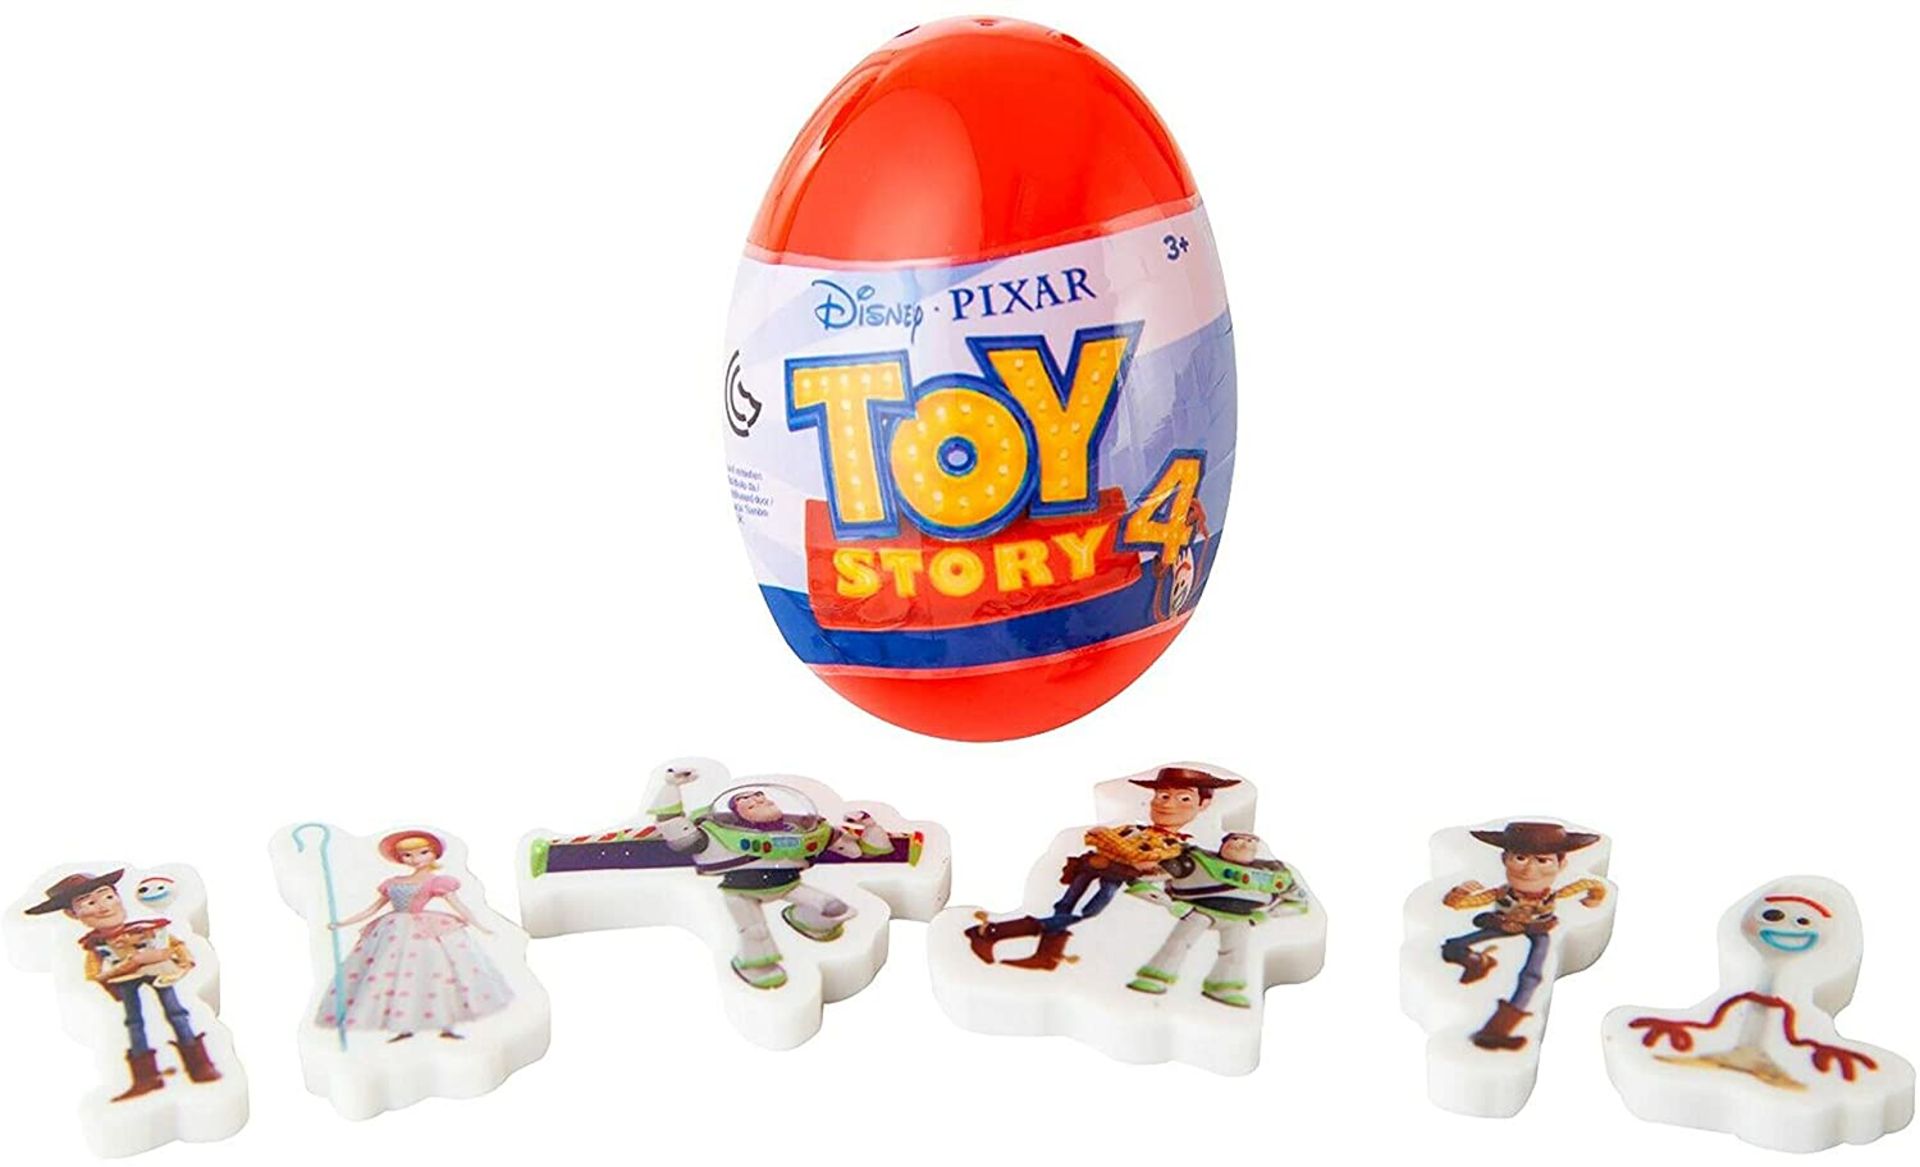 Box Of 12 Toy Story 4 Surpise Eggs With Erasers - RRP £24.99. - Image 2 of 2